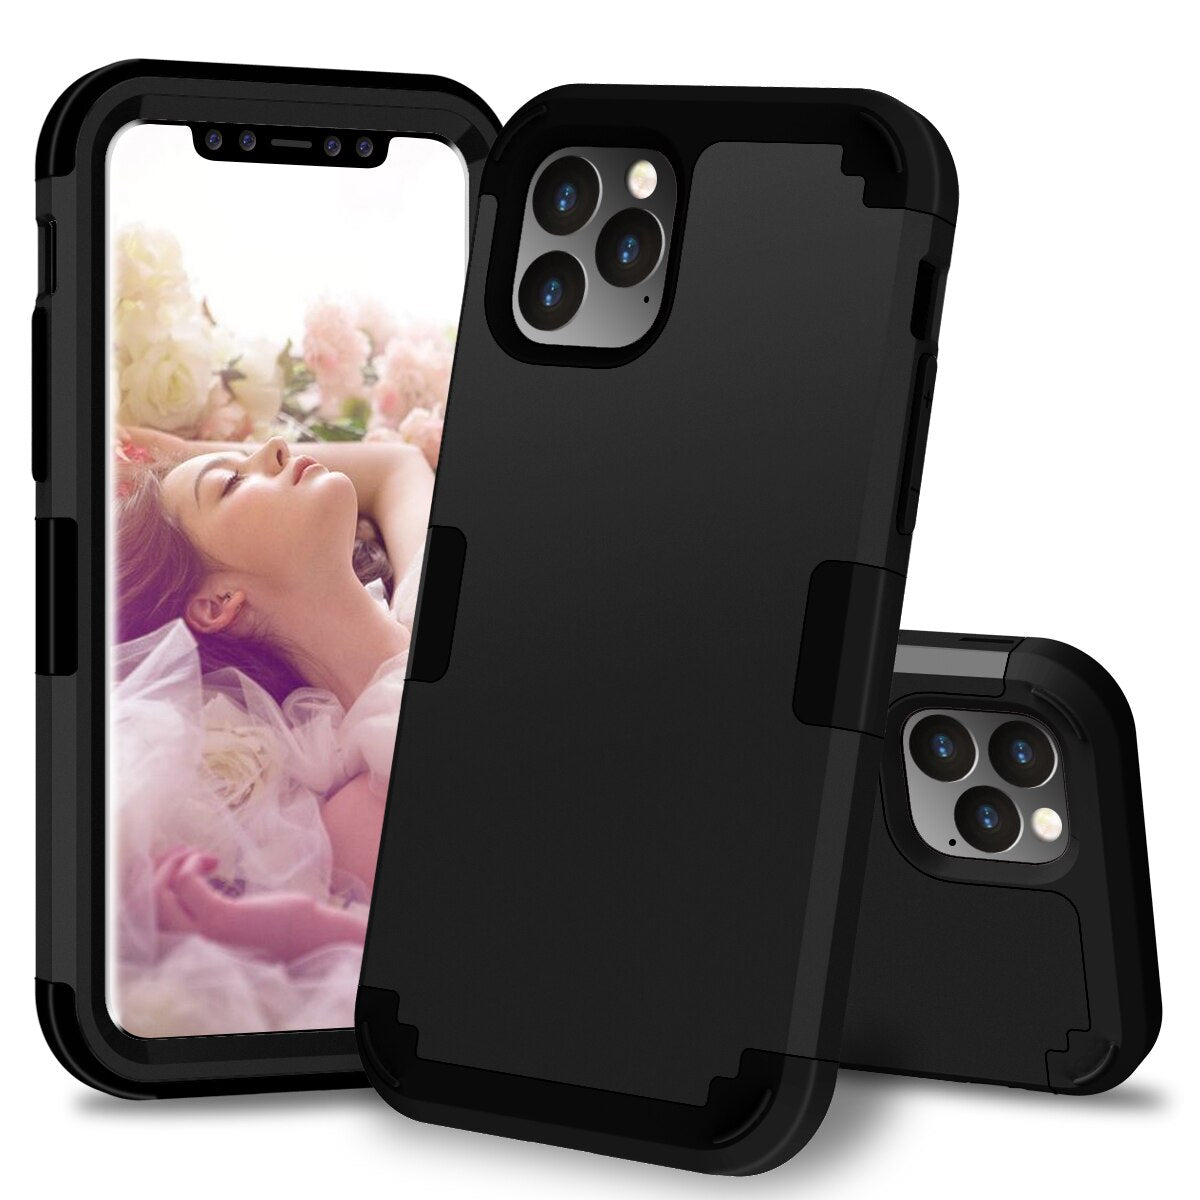 For Apple iPhone 11 2019 Case Shockproof Protect Hybrid Hard Rubber Impact Armor Phone Cases For iPhone 11 2019 Cover - 380230 for iPhone X XS / BLACK / United States Find Epic Store